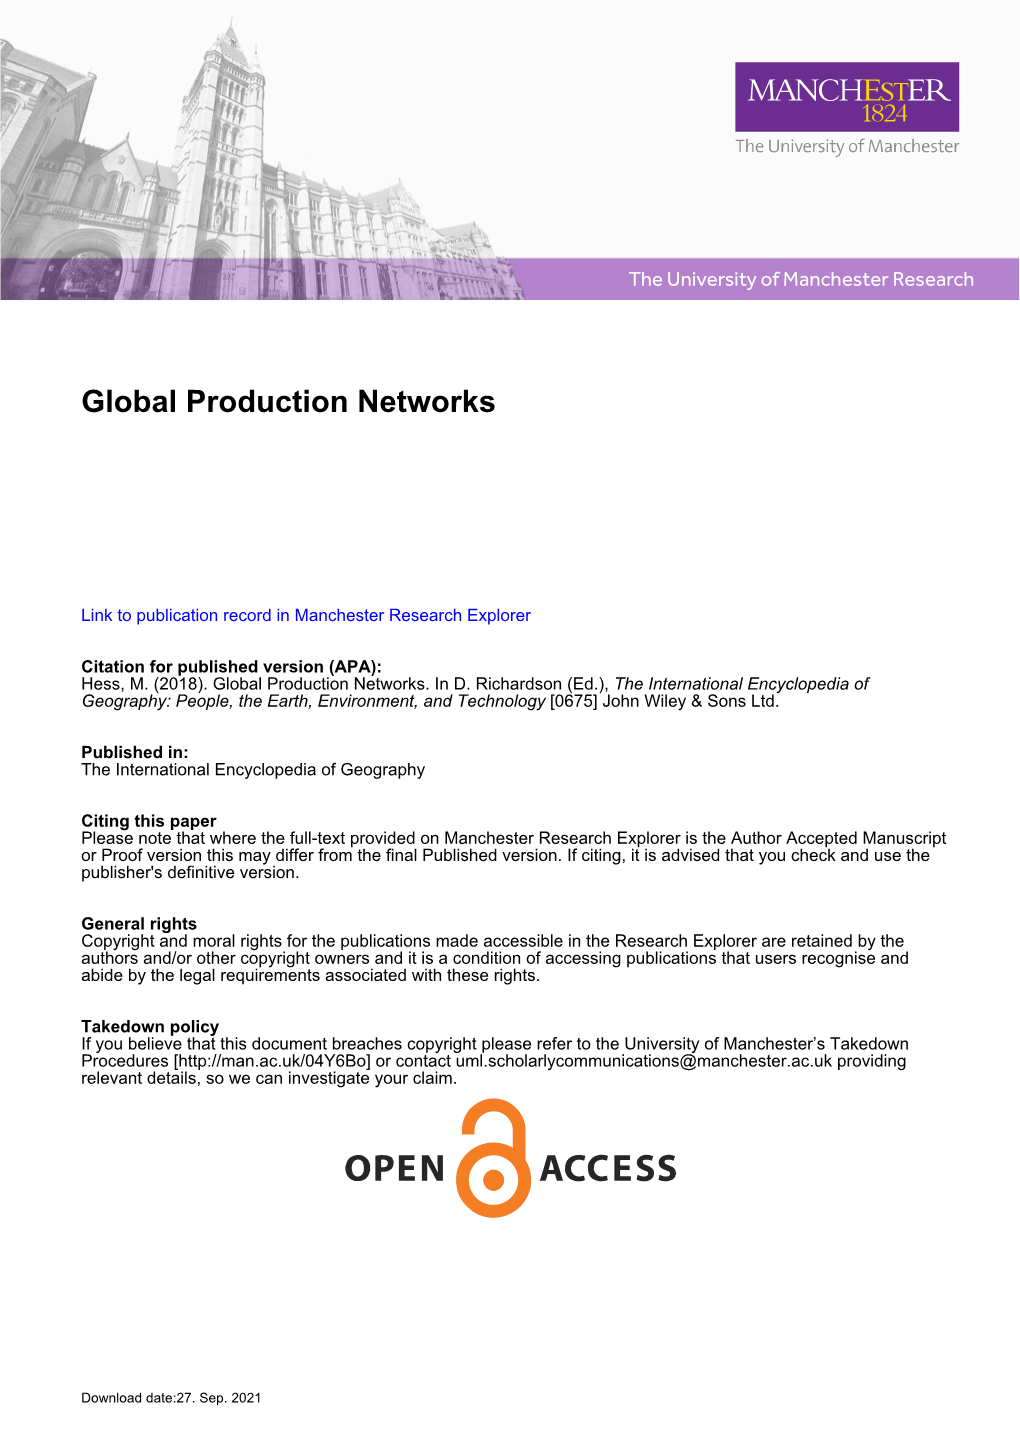 "Global Production Networks" In